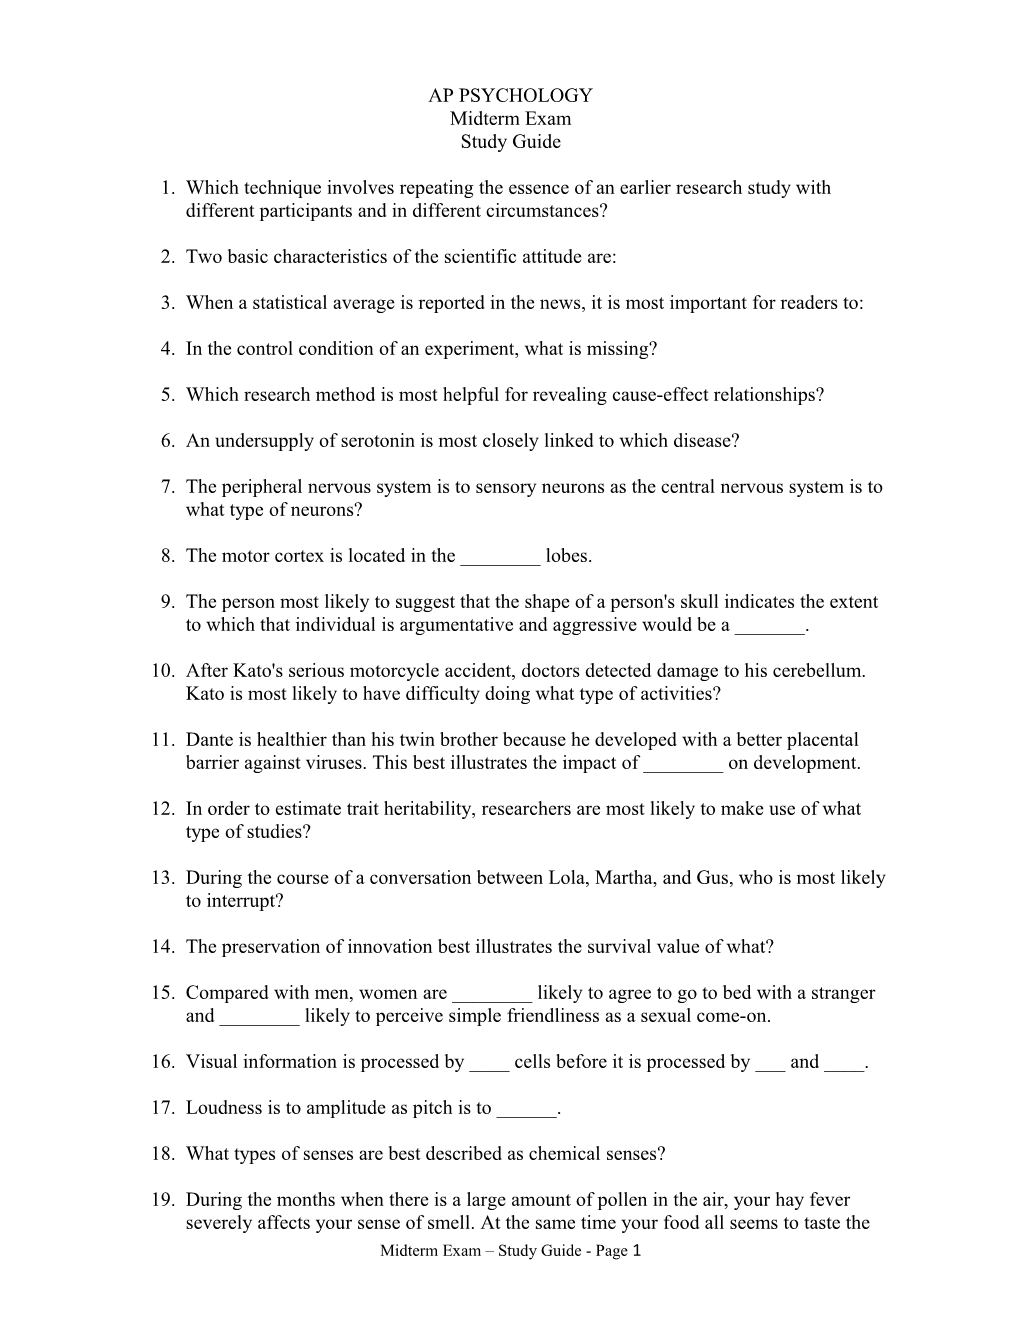 Midterm Exam Study Guide - Page 1